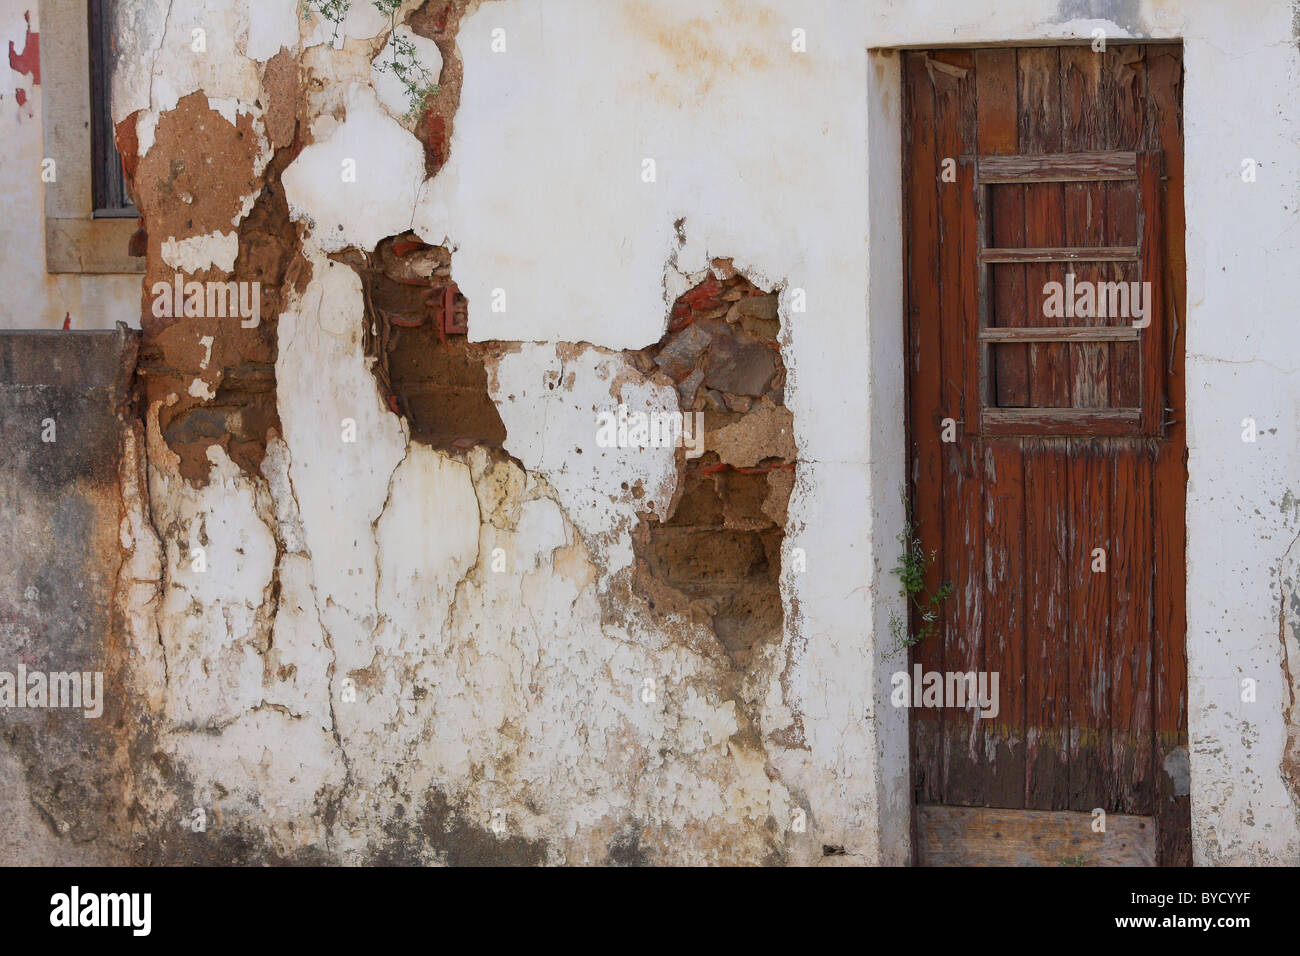 An old poor building where the plaster is falling off the walls Stock Photo